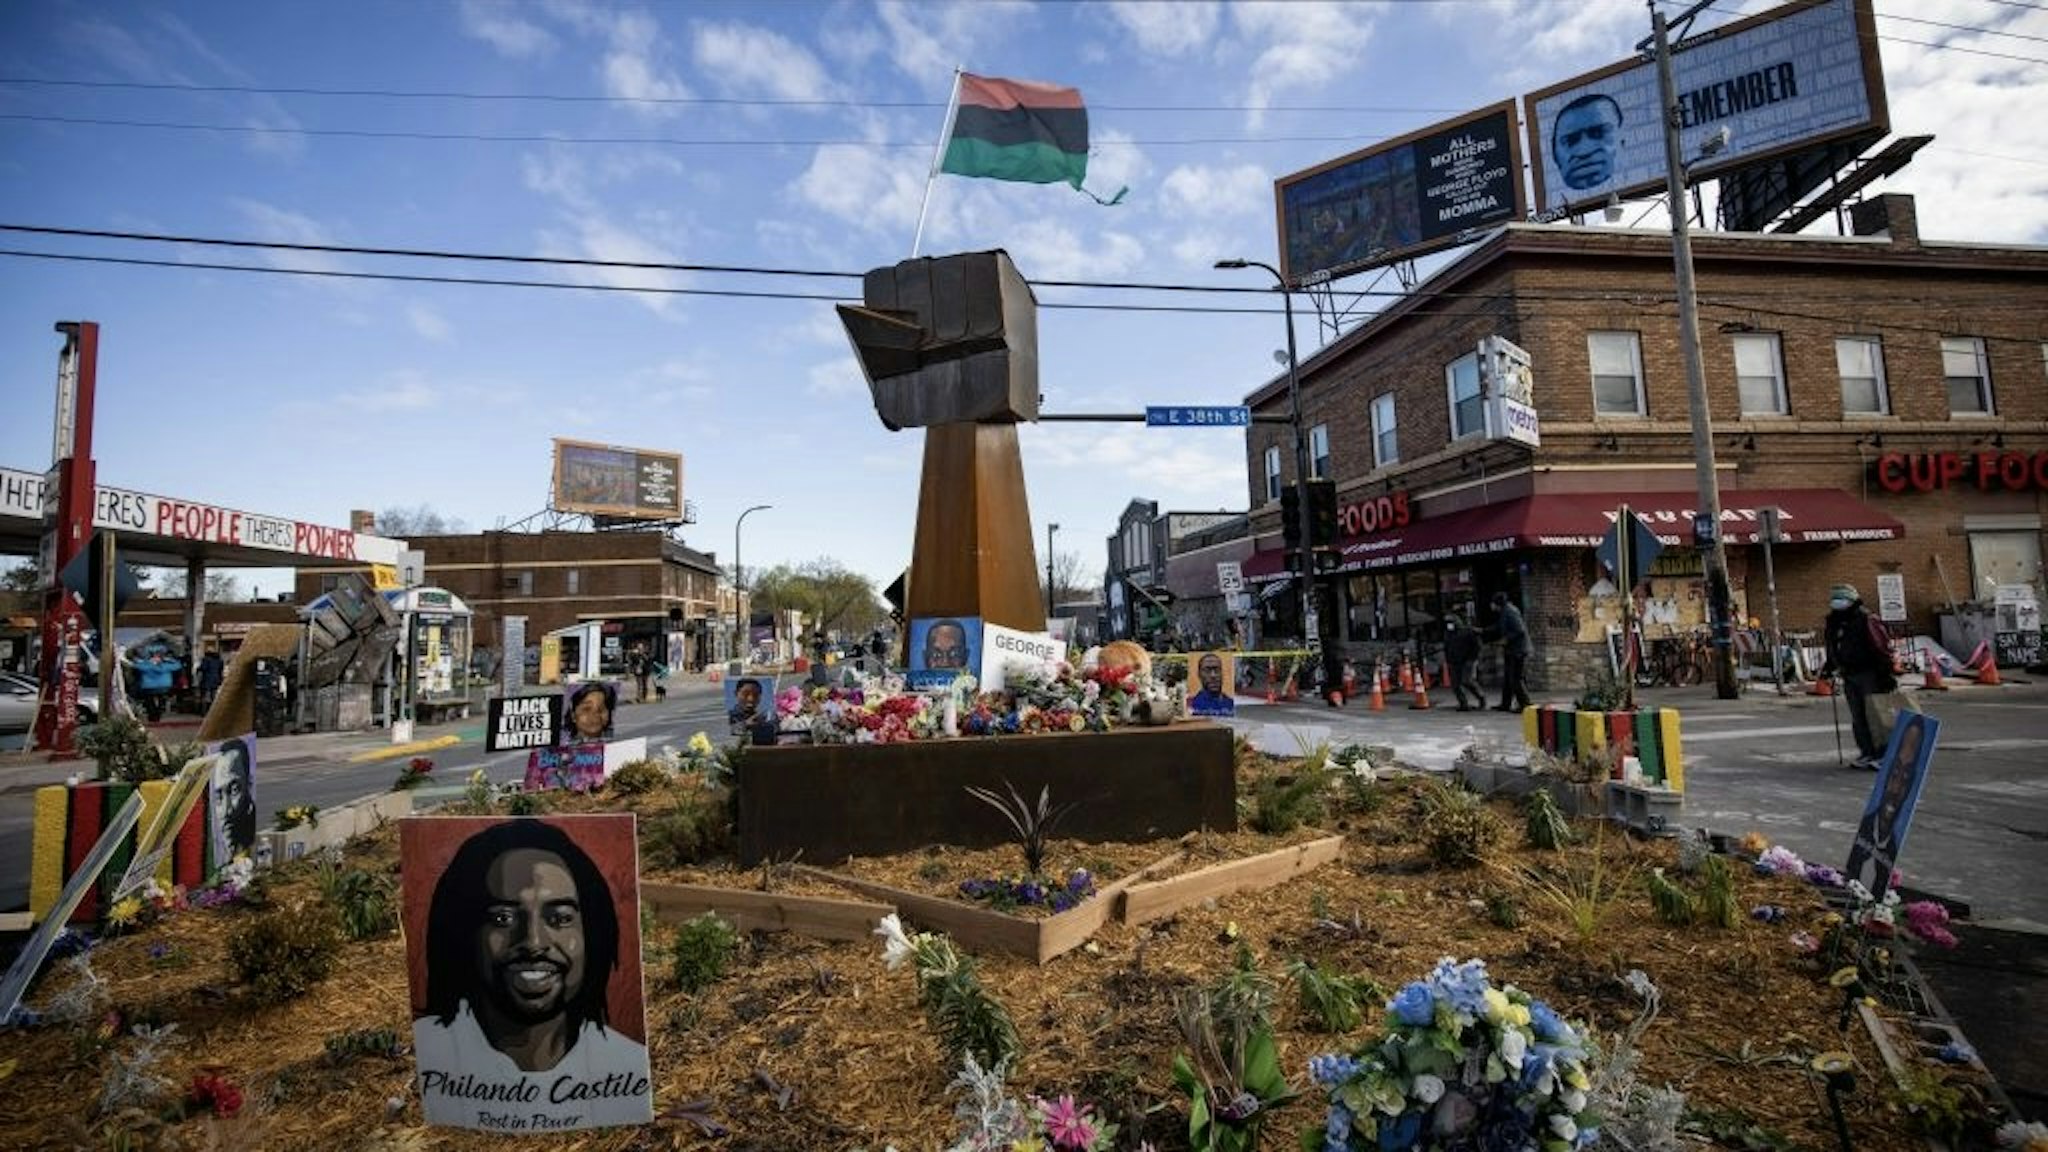 Jury Begins Deliberation In Former Officer Chauvin Murder Trial A Pan-African flag flies above a wooden fist statue at George Floyd Square in Minneapolis, Minnesota, U.S., on Tuesday, April 20, 2021. The case of the former Minneapolis police officer accused of killing George Floyd went to the jury after Derek Chauvin's defense attorney said the viral video of him kneeling on Floyd's neck and back doesn't tell the entire story. Photographer: Christian Monterrosa/Bloomberg Bloomberg / Contributor via Getty Images